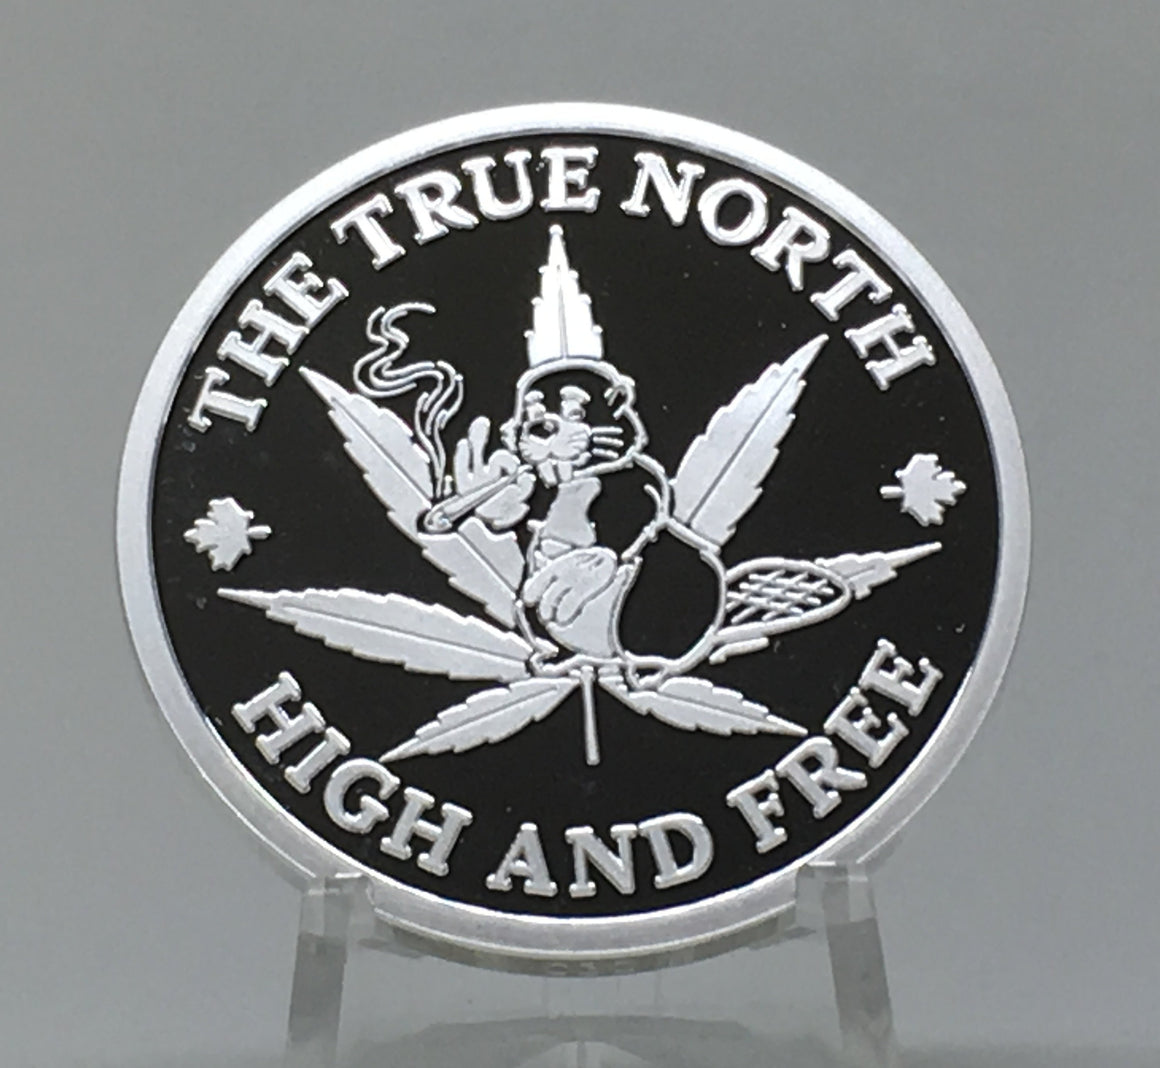 Toking Beaver - The True North High and Free by Beaver Bullion, 1oz .999 Proof Silver Round